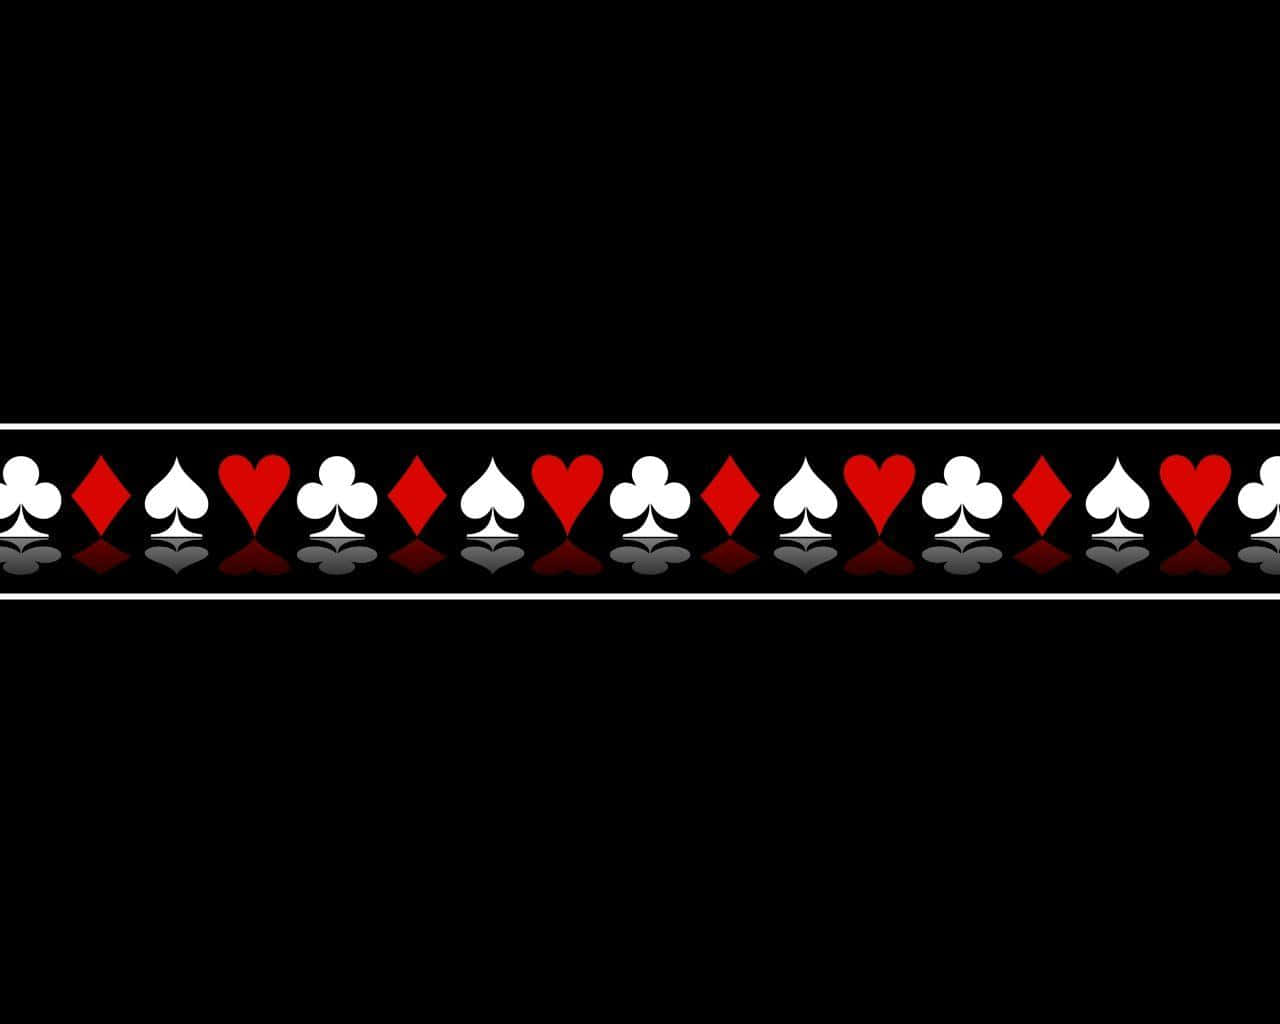 A Black Background With Playing Cards And Hearts